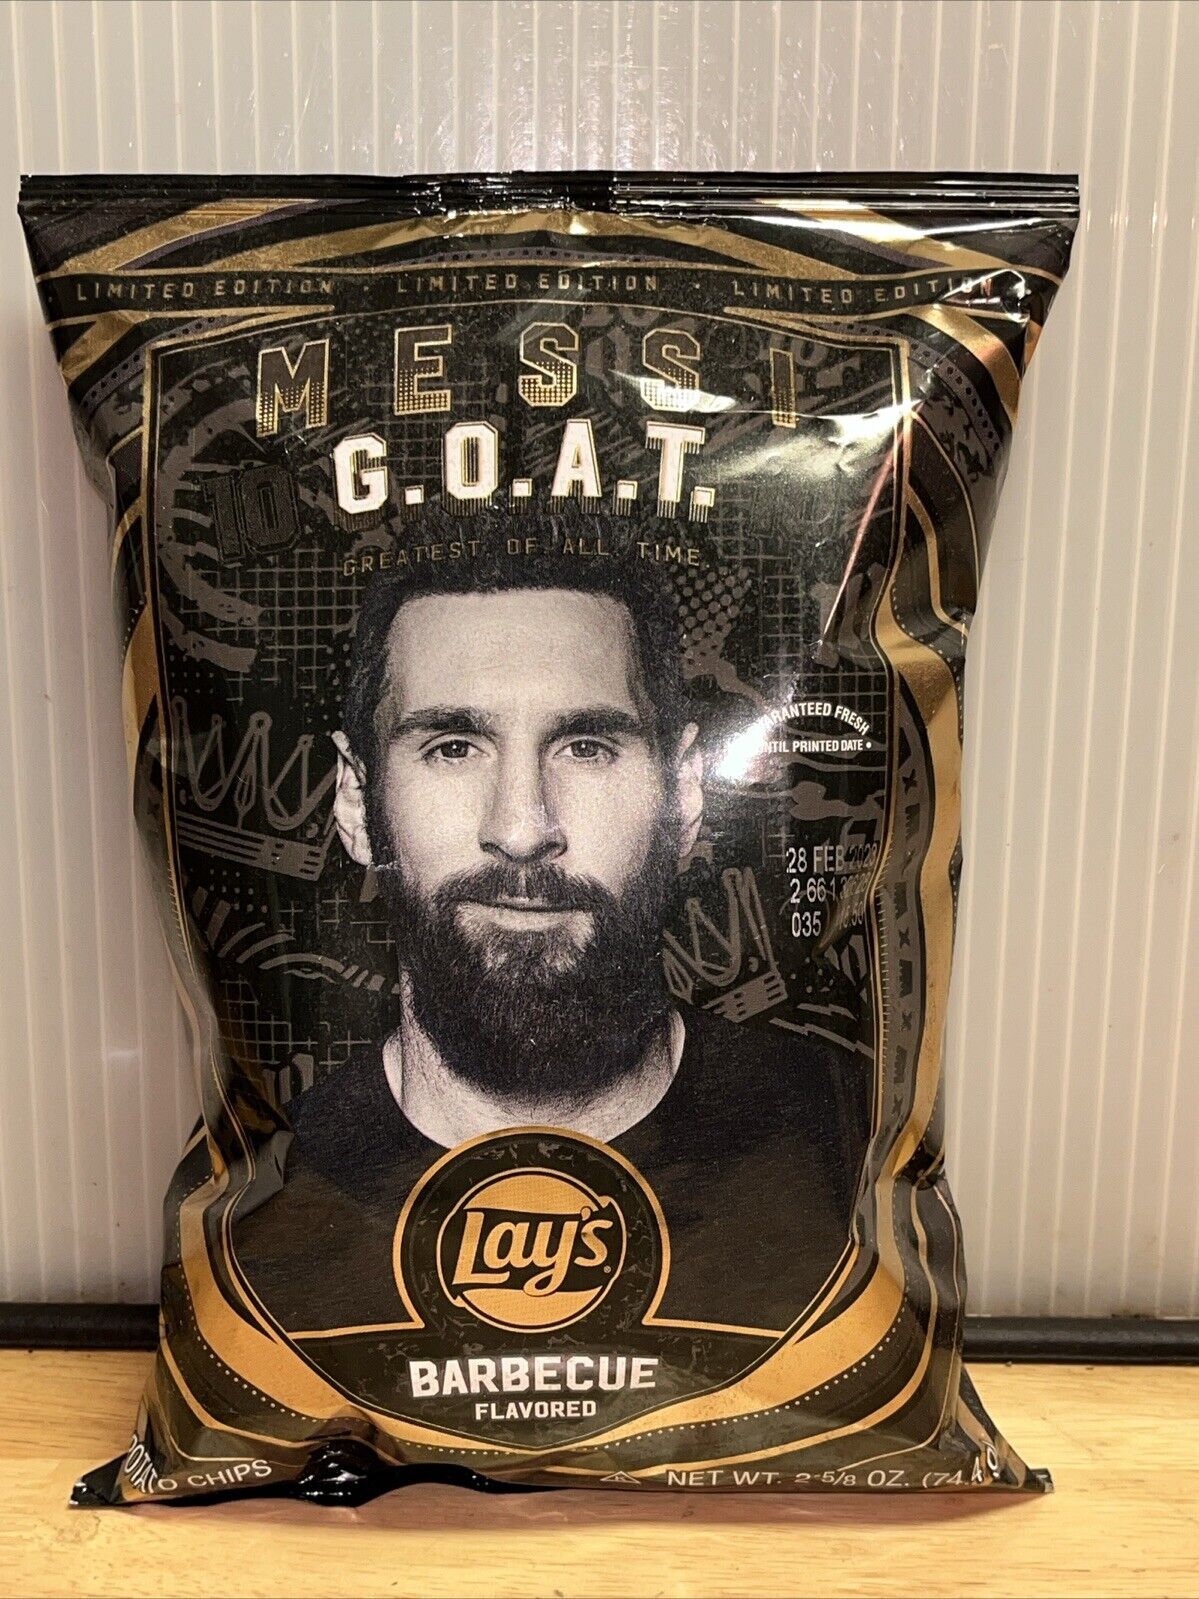 Lays BBQ Chips Lionel Messi G.O.A.T. Limited Edition Bag Unopened - Exp. 2/28/23